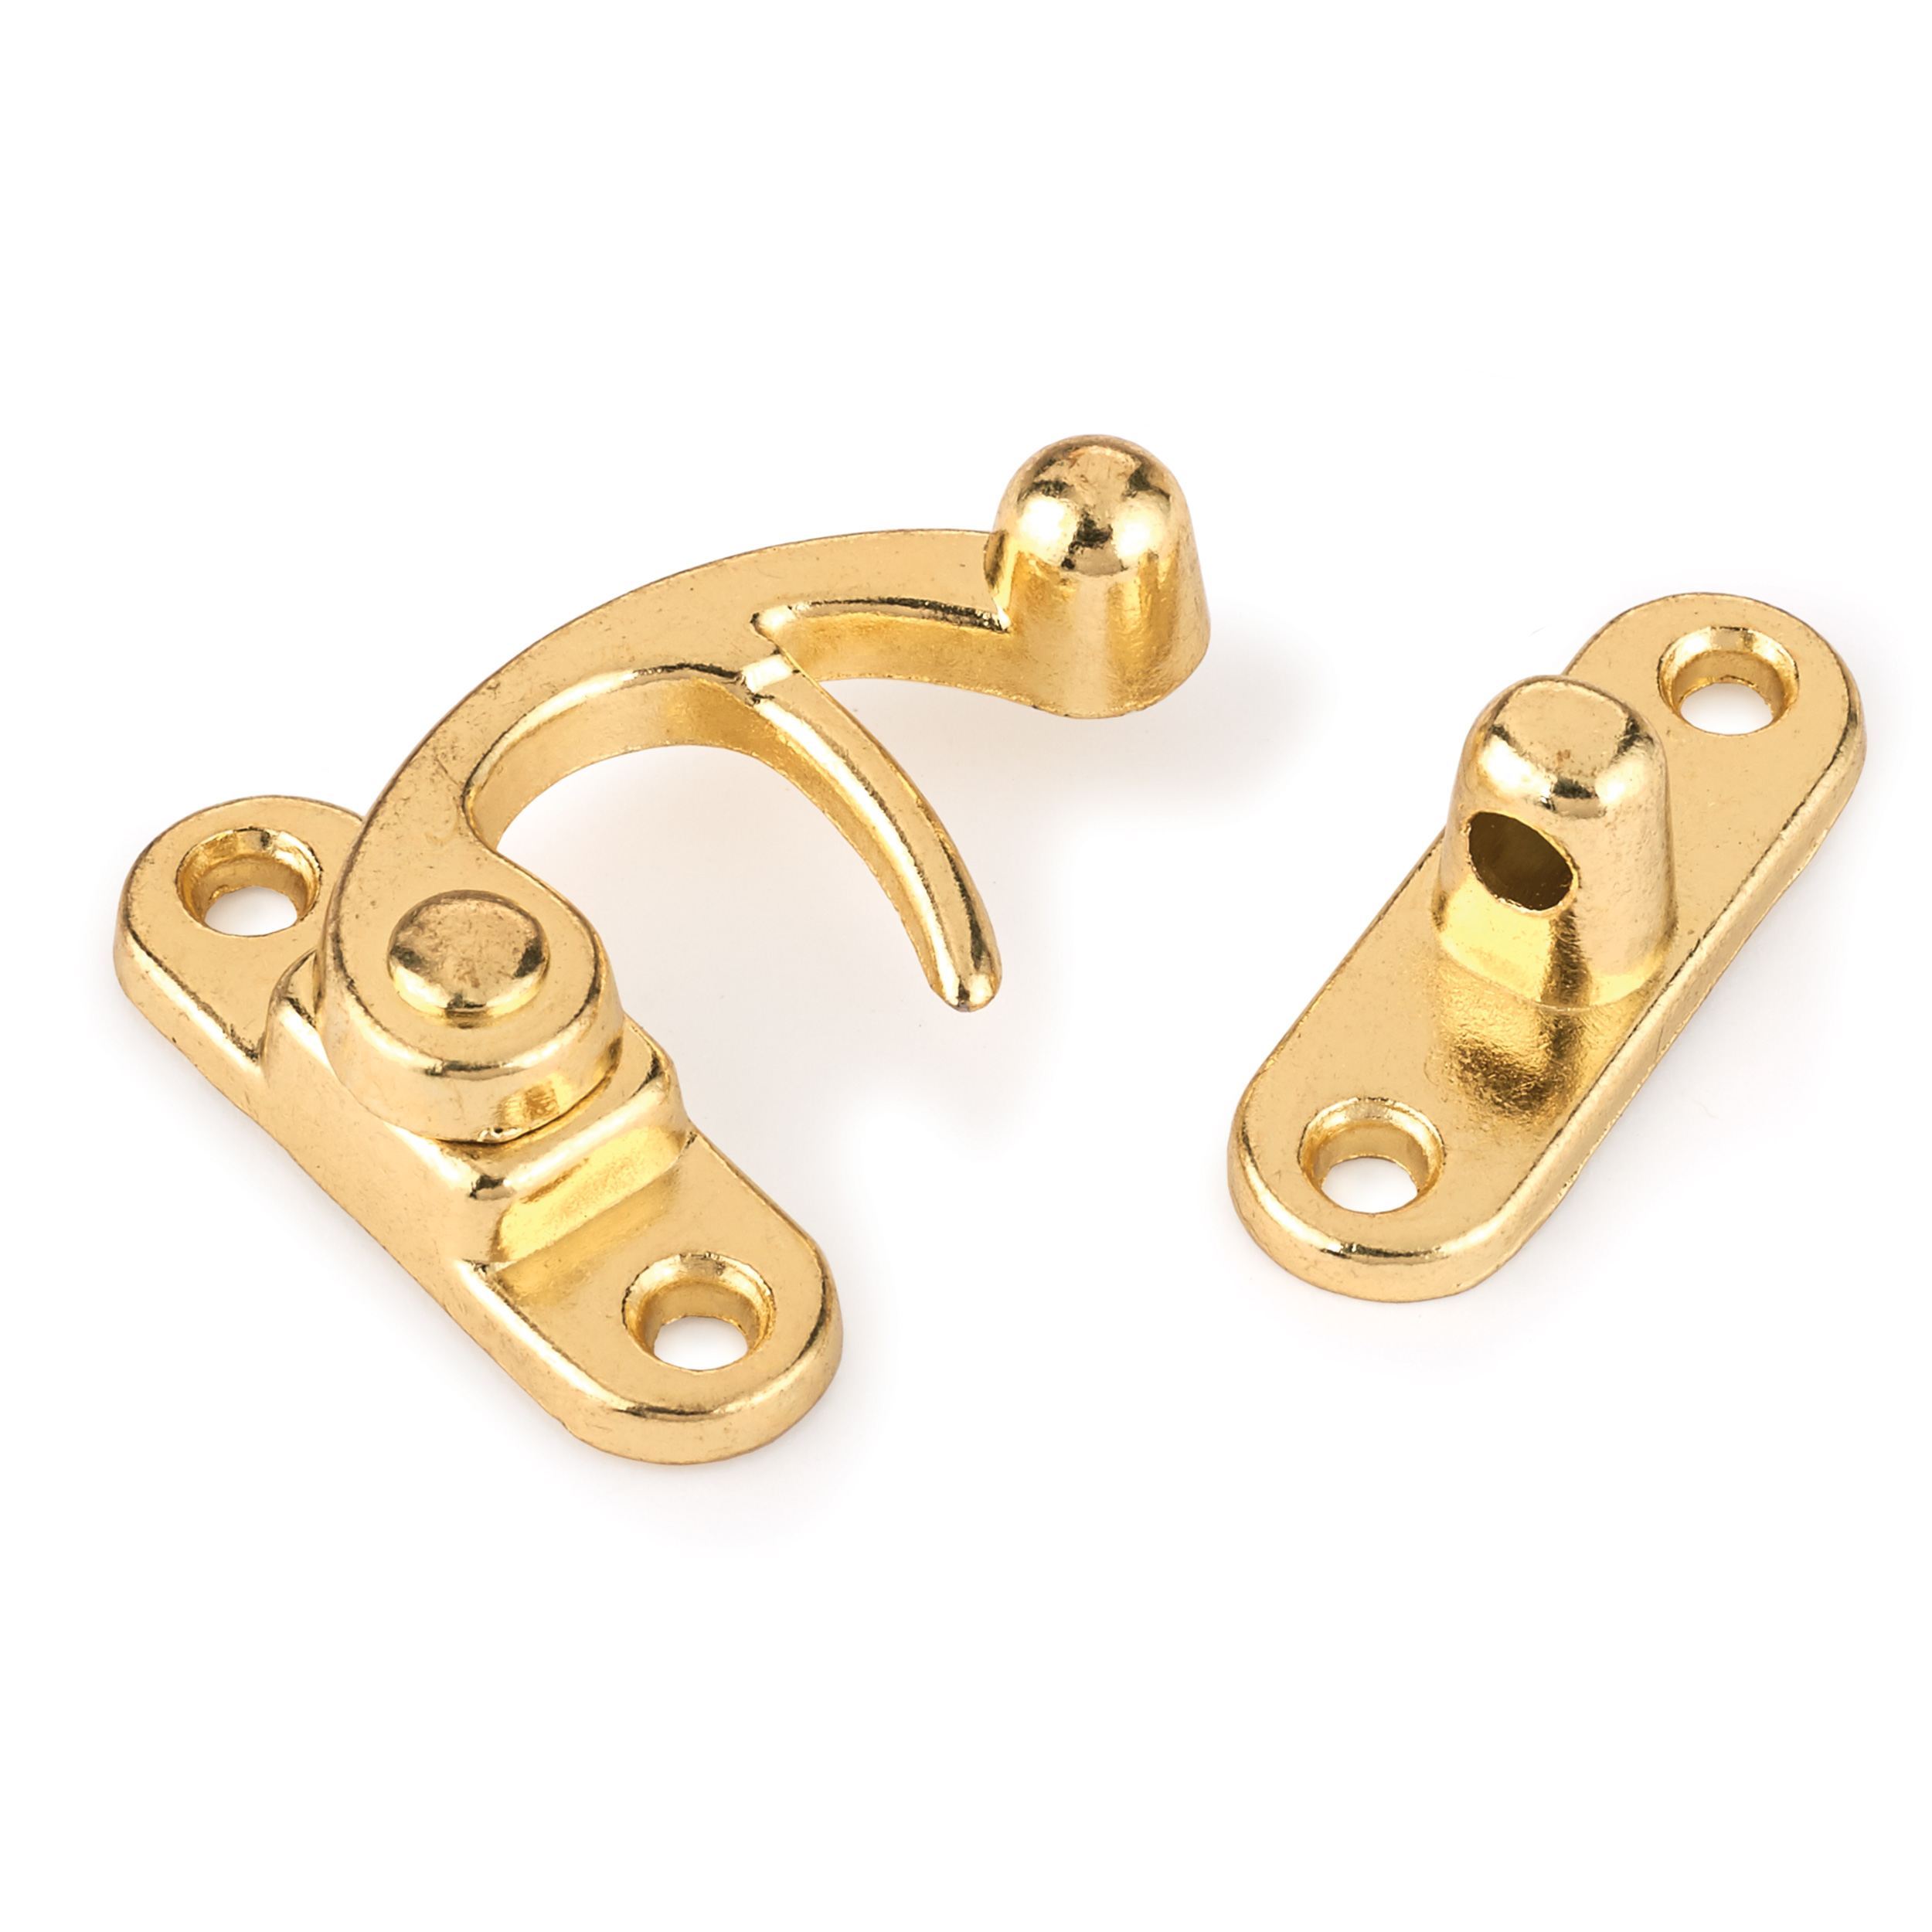 Hook Latch Small Polished Brass Plated 1-piece With Screws